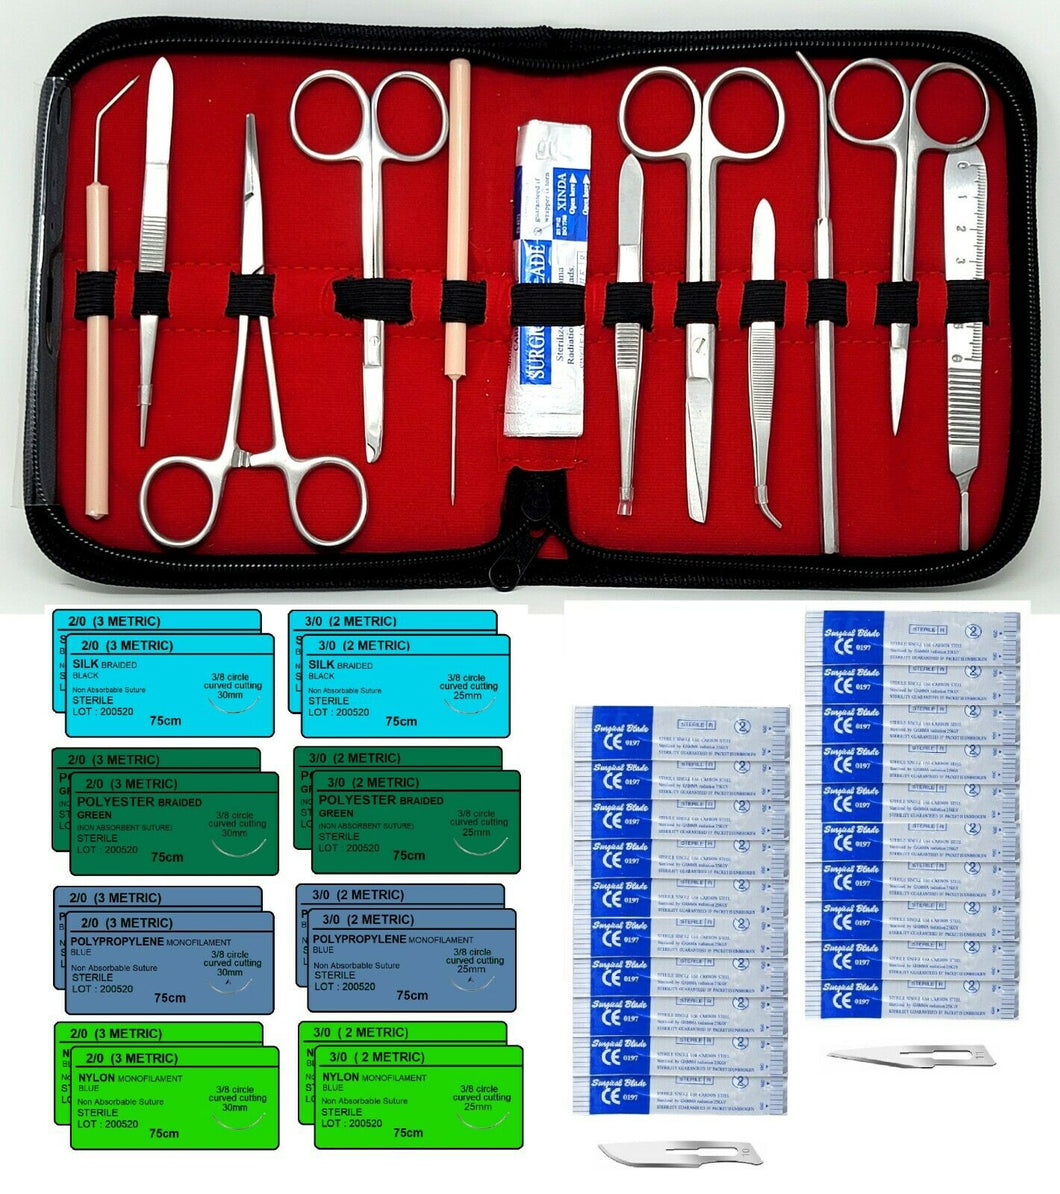 48 Pc Complete Suture Practice Surgical Training Kit for Medical and Veterinary Student Training